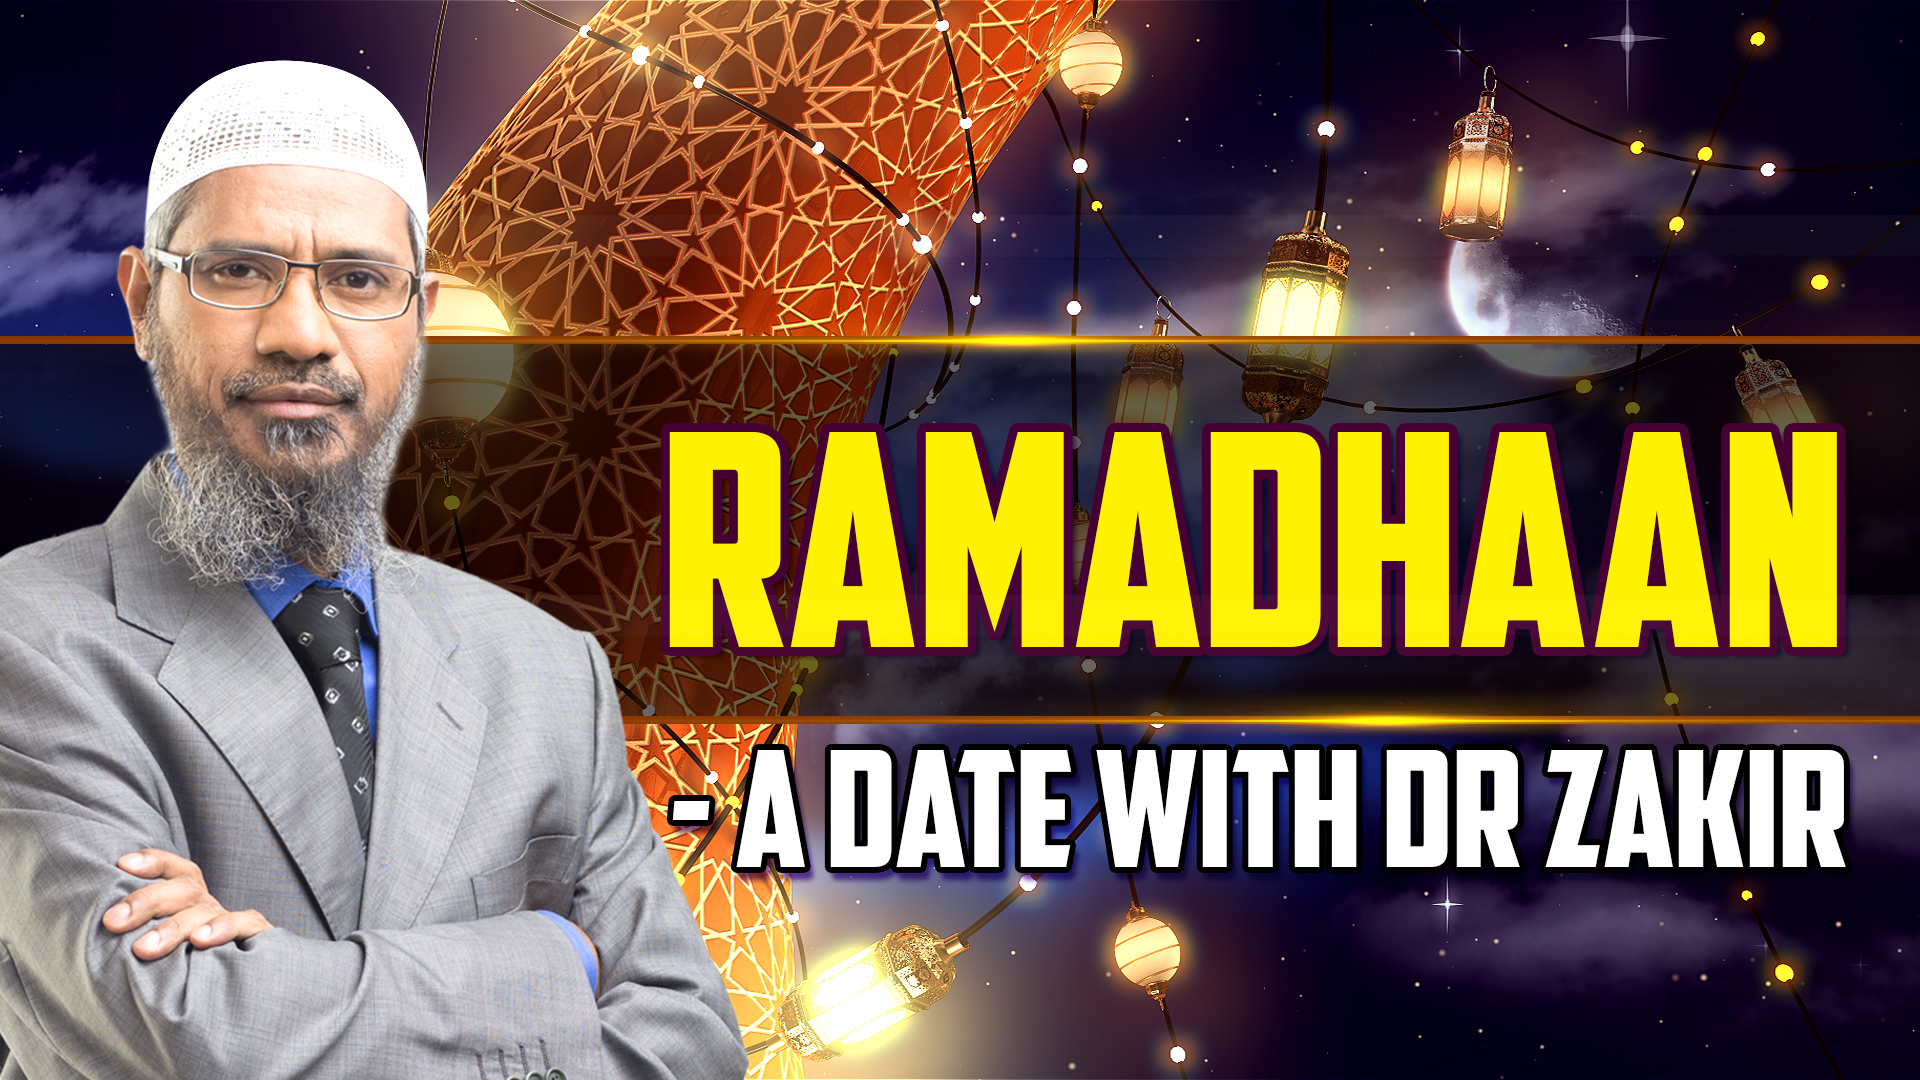 The Holy Month of Ramadan – A Date With Dr Zakir